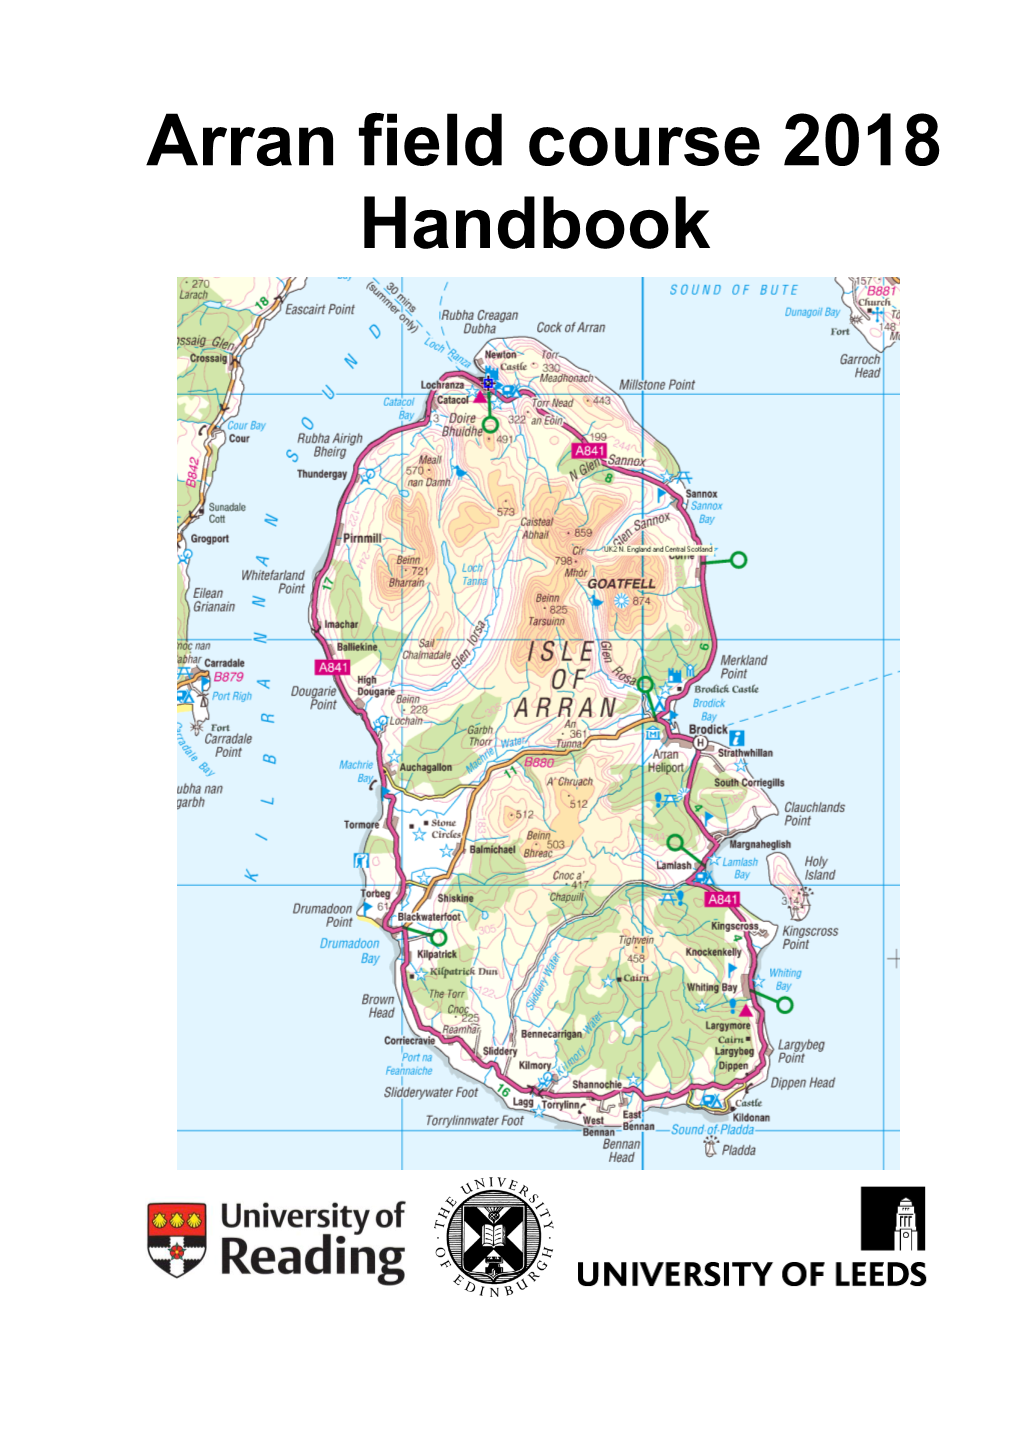 Arran Handbook.’ It Contains the Details of All the Exercises to Be Undertaken on the Field Trip